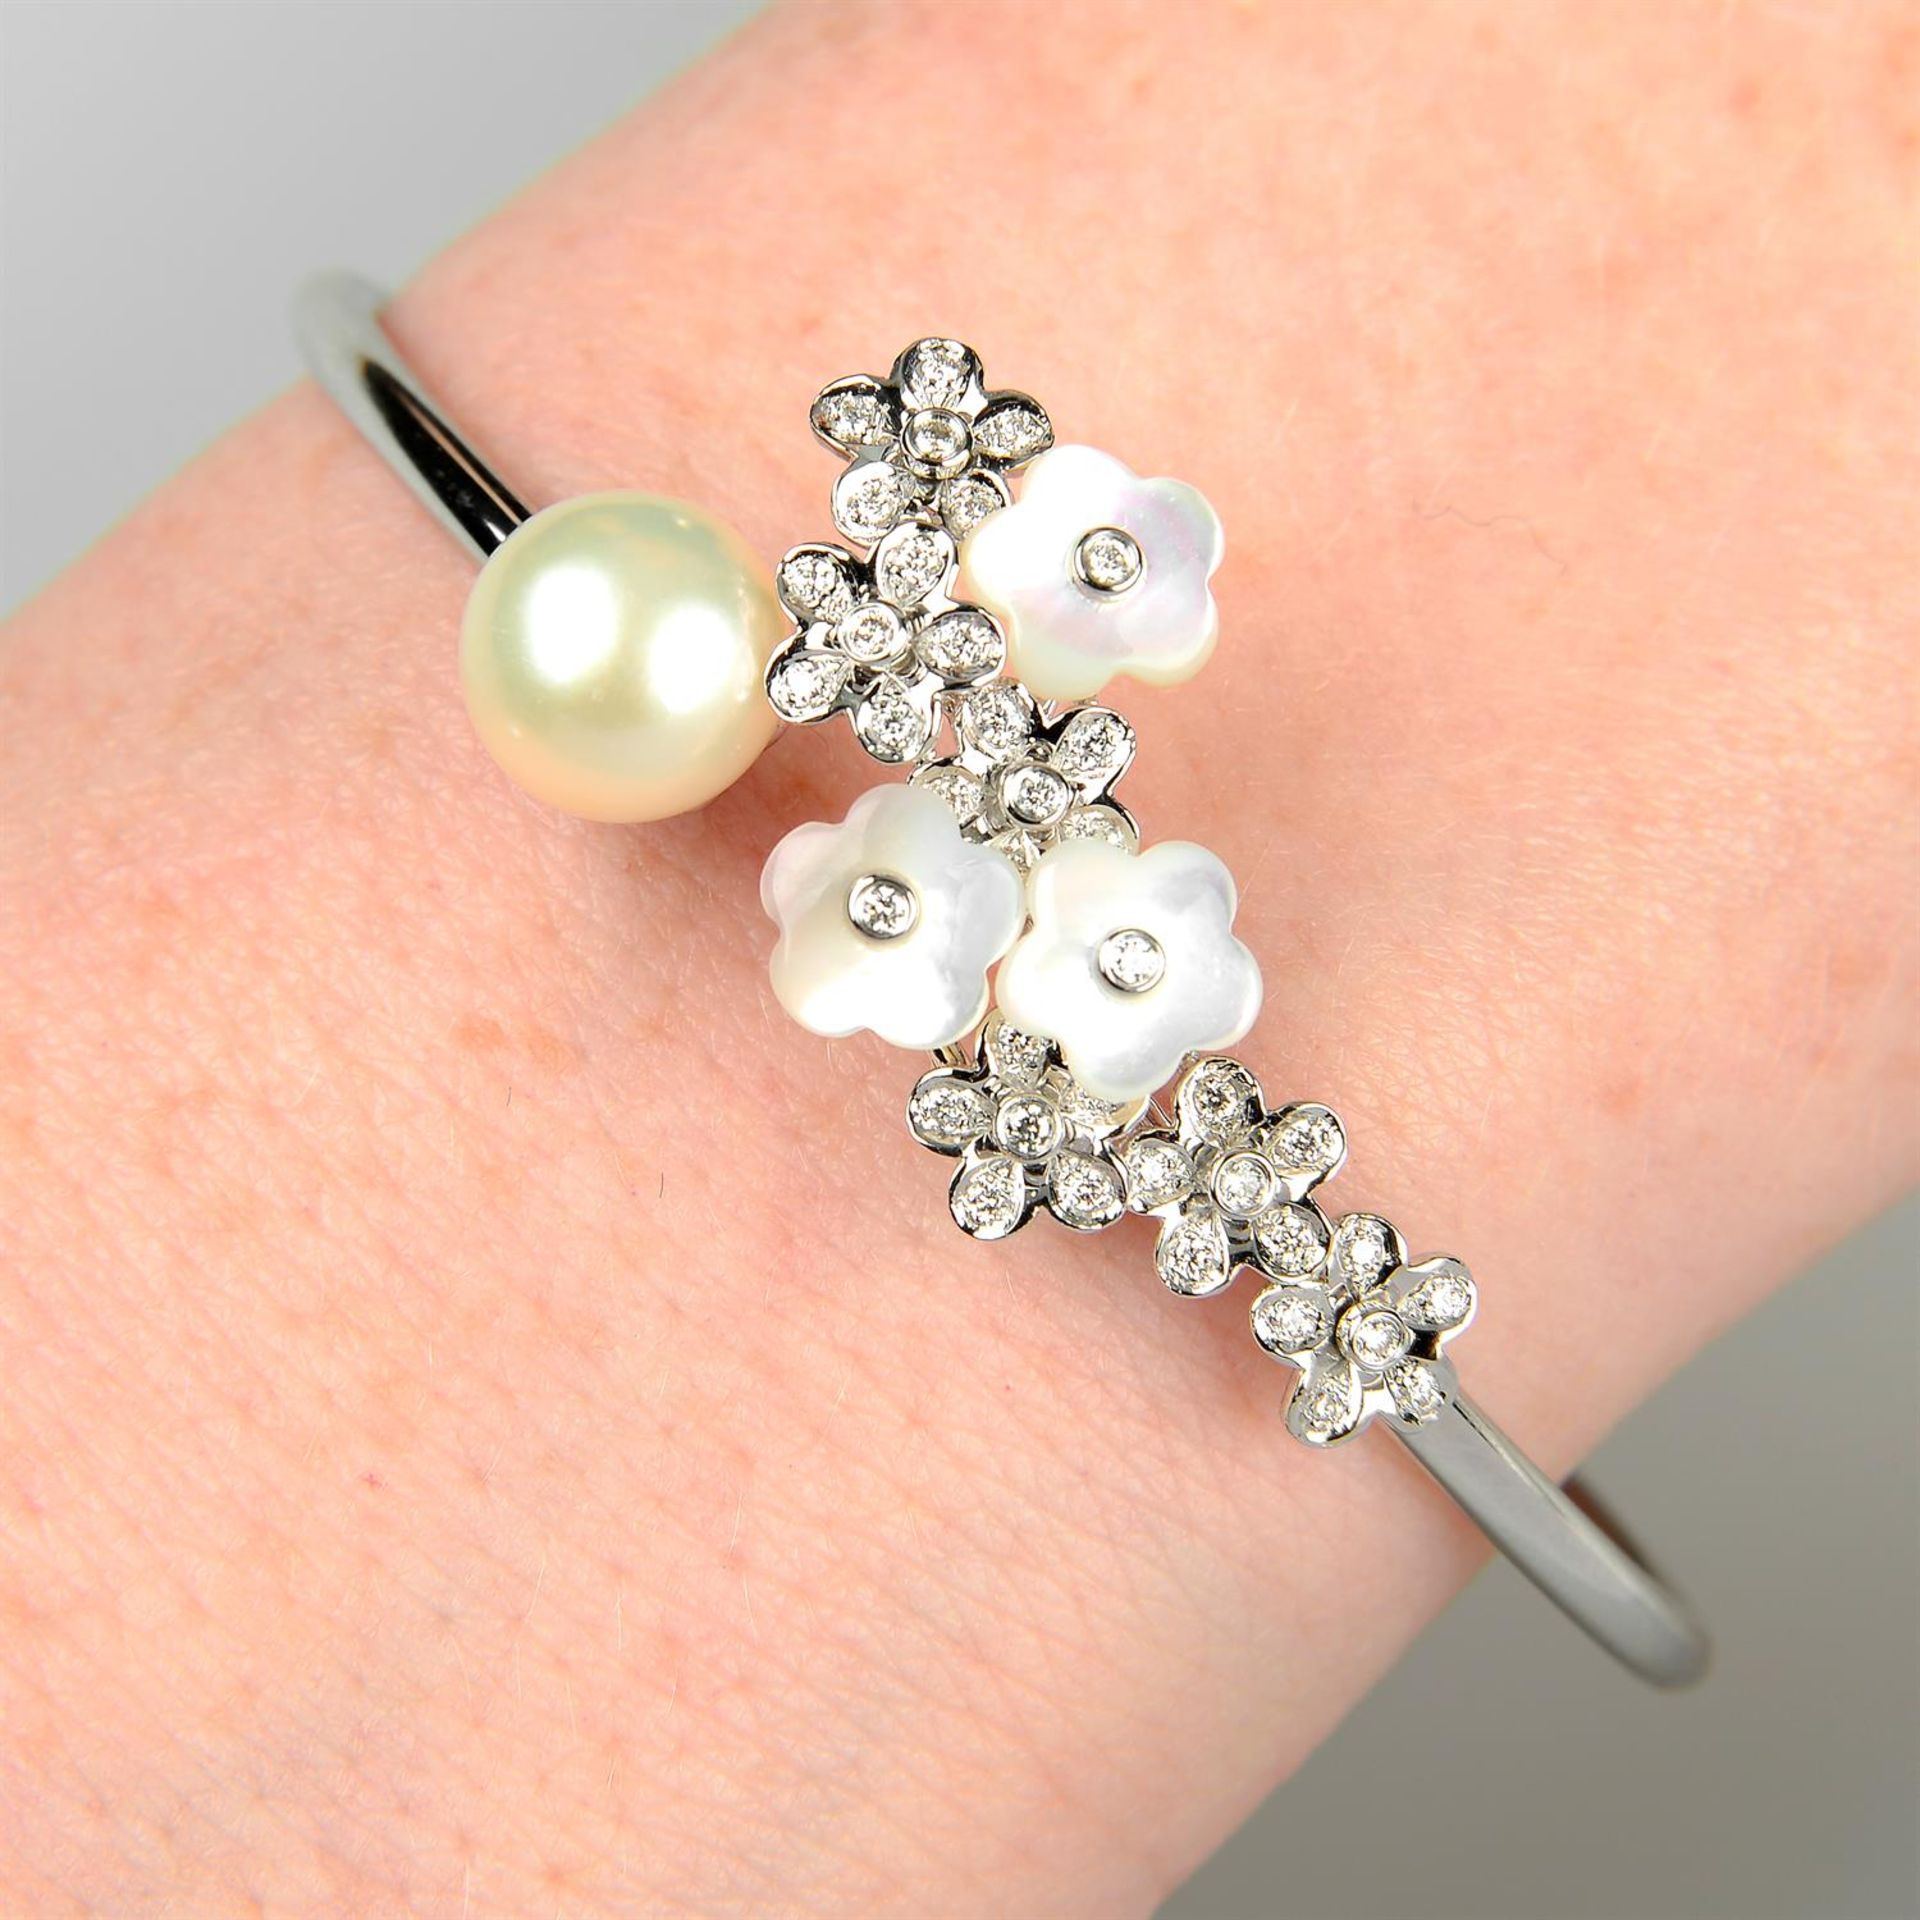 An 18ct gold diamond, mother-of-pearl and cultured pearl floral cuff bangle.